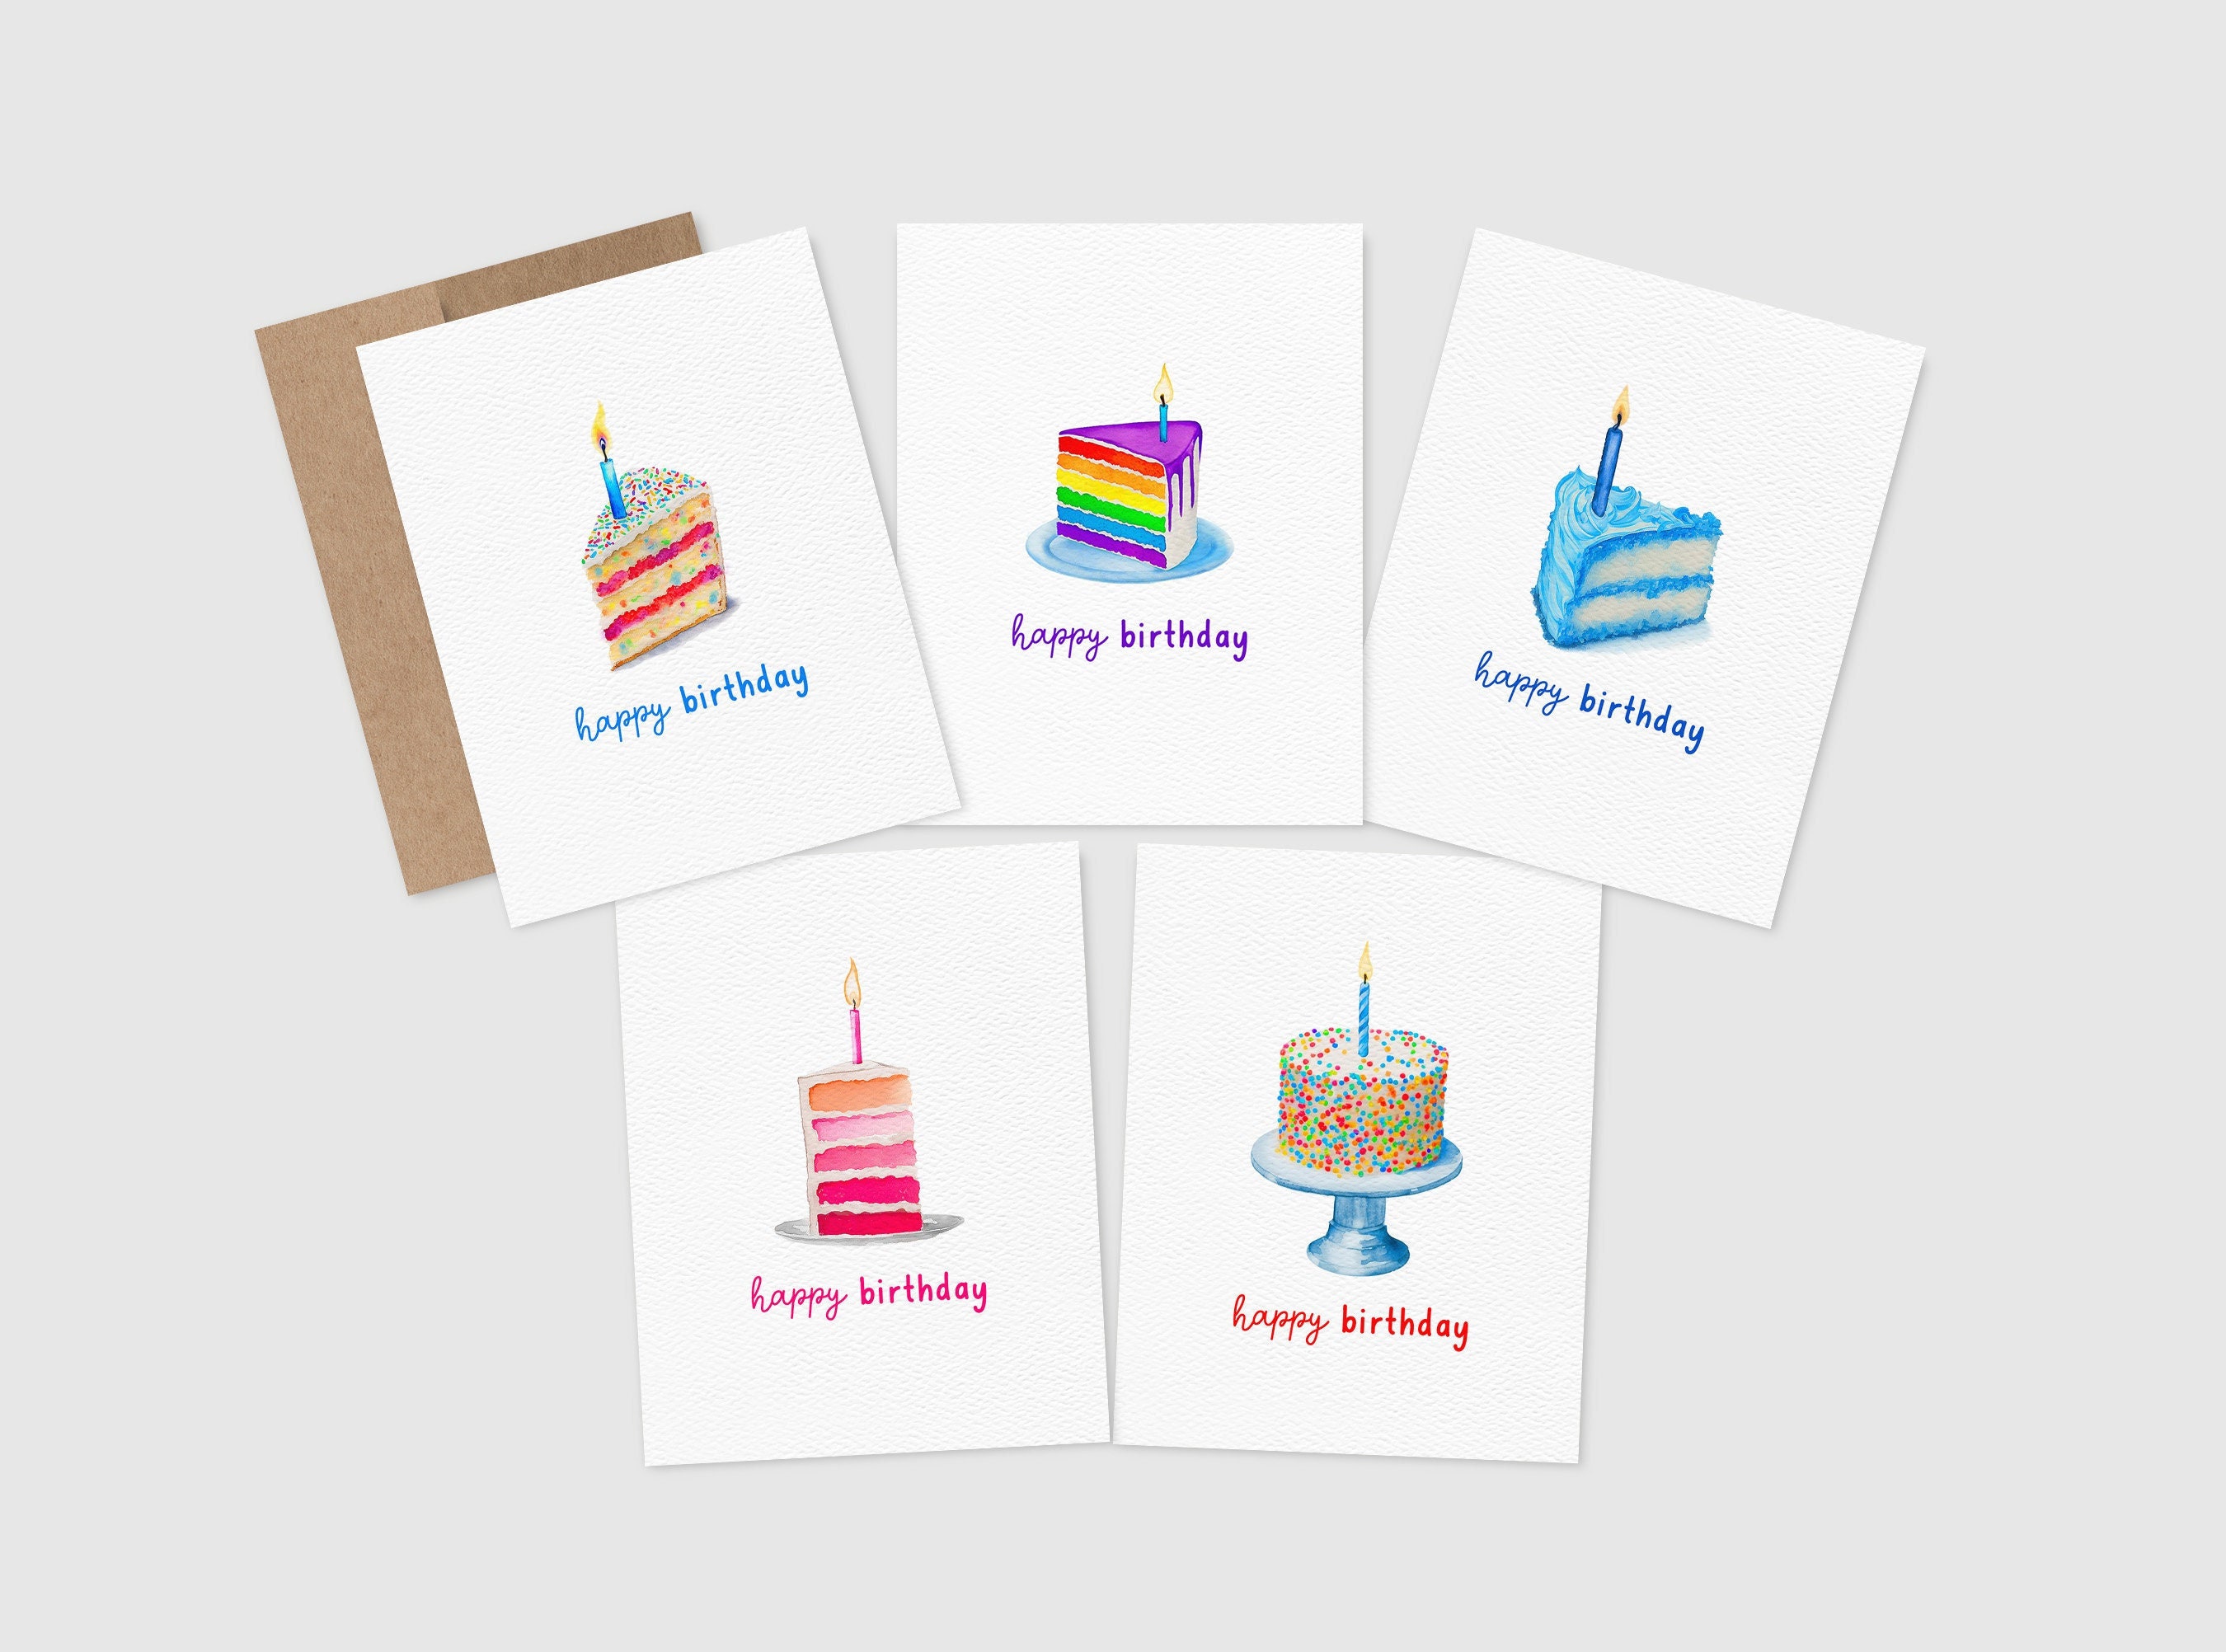  Dessie 60 Unique Large Greeting Cards Assortment with